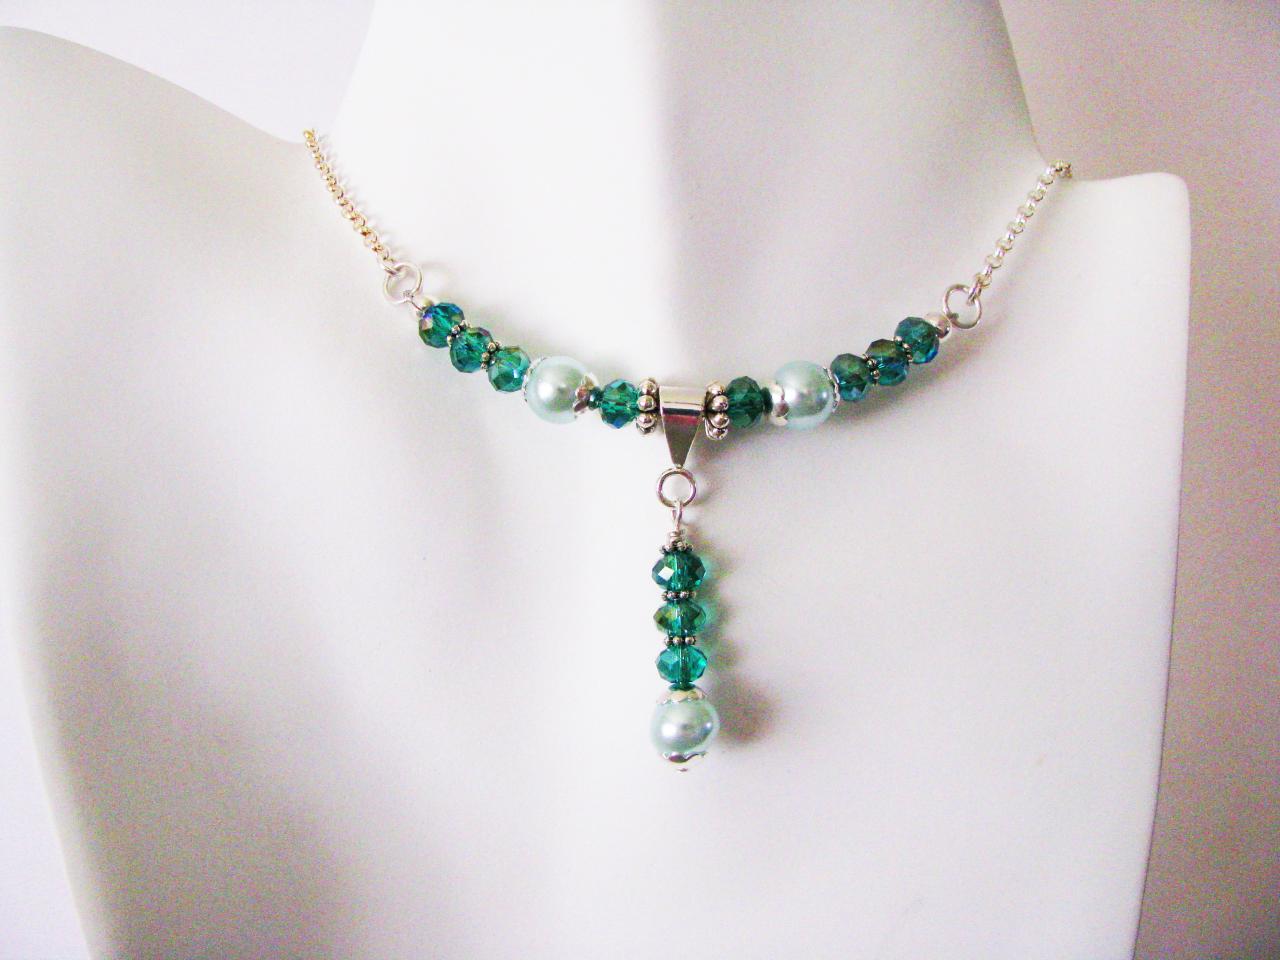 Neptune's Daughter Necklace Pearl Choker Necklace Teal Necklace Swarovski Crystal Necklace